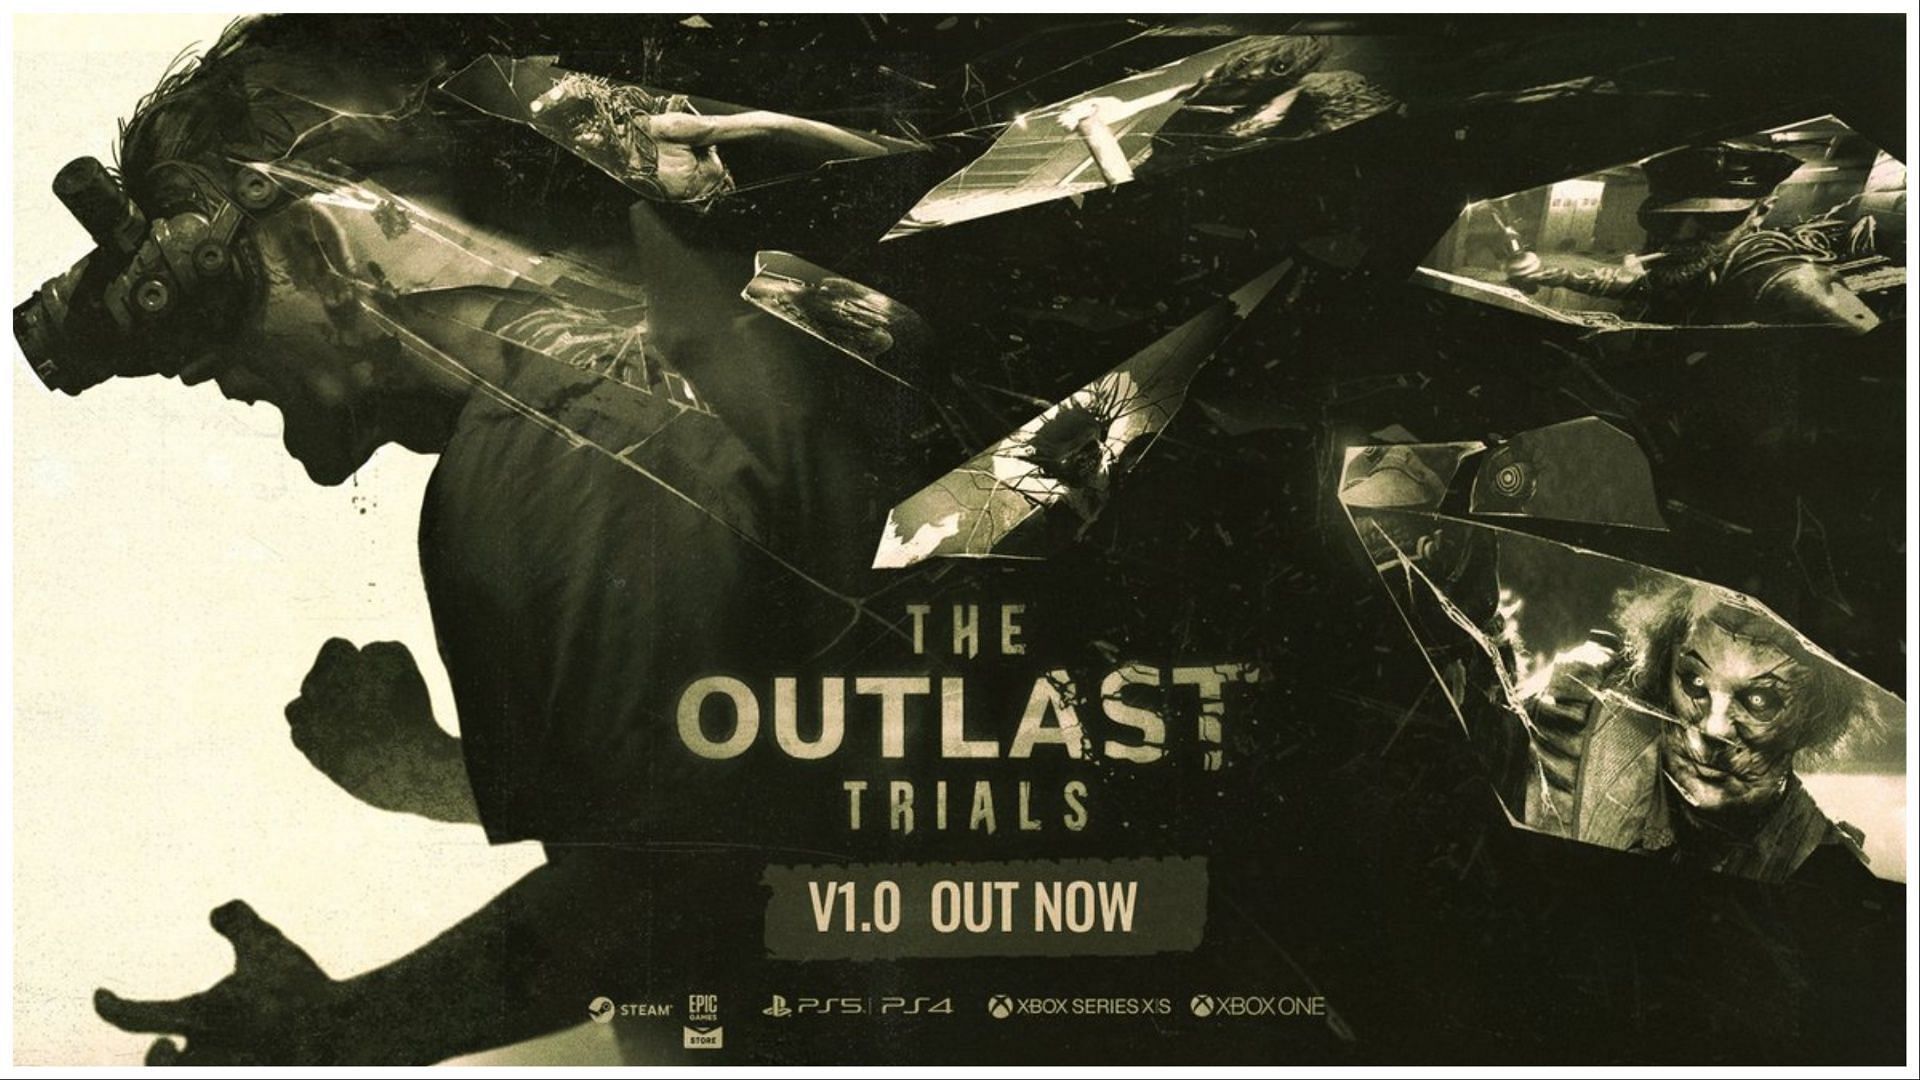 The Outlast Trials is out on Xbox consoles.